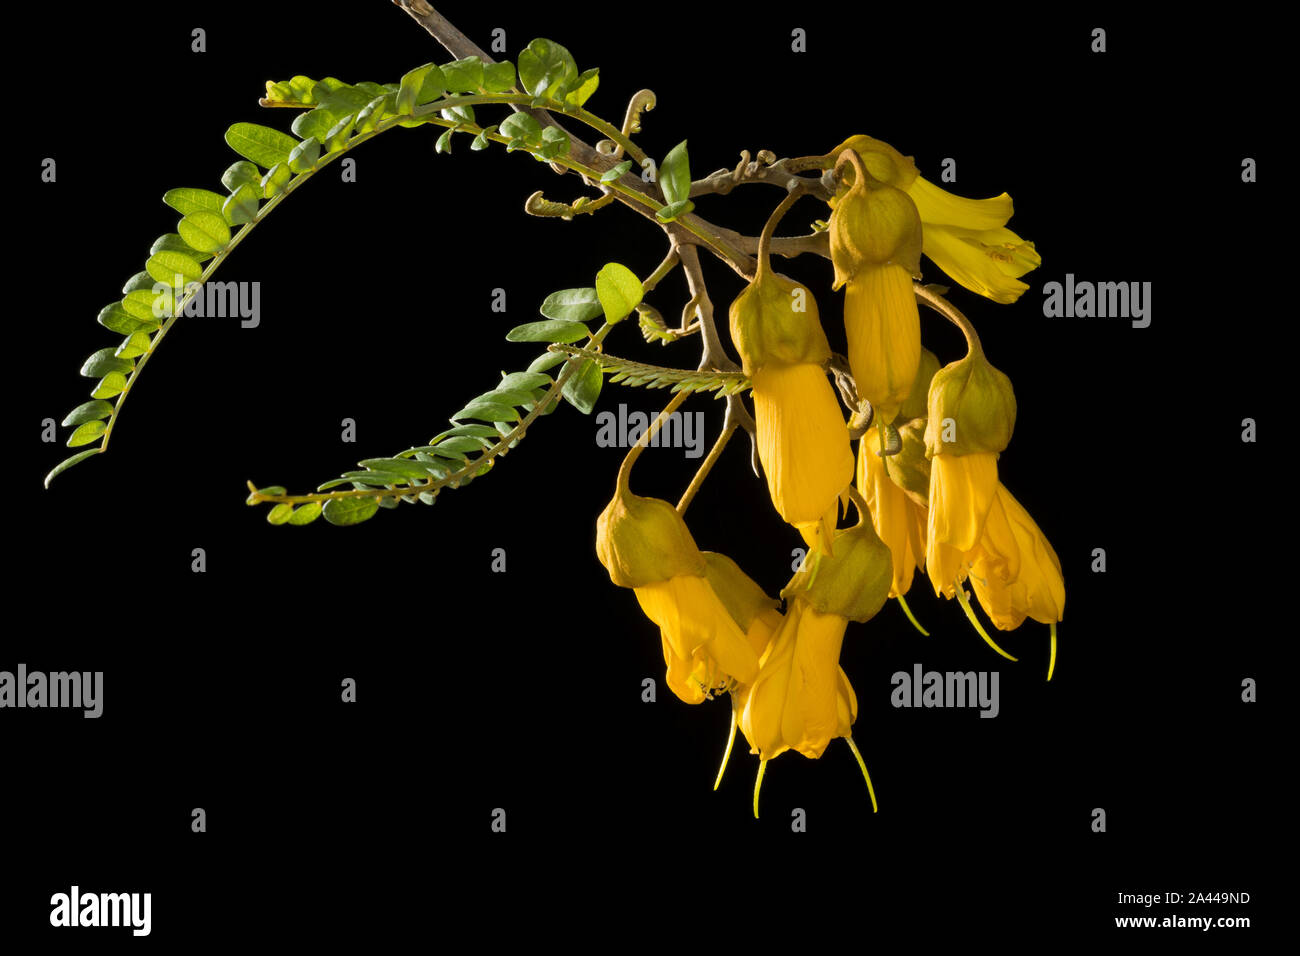 Cluster of yellow flowers and leaves of the Kowhai tree, a native of New Zealand, against a black background. Stock Photo